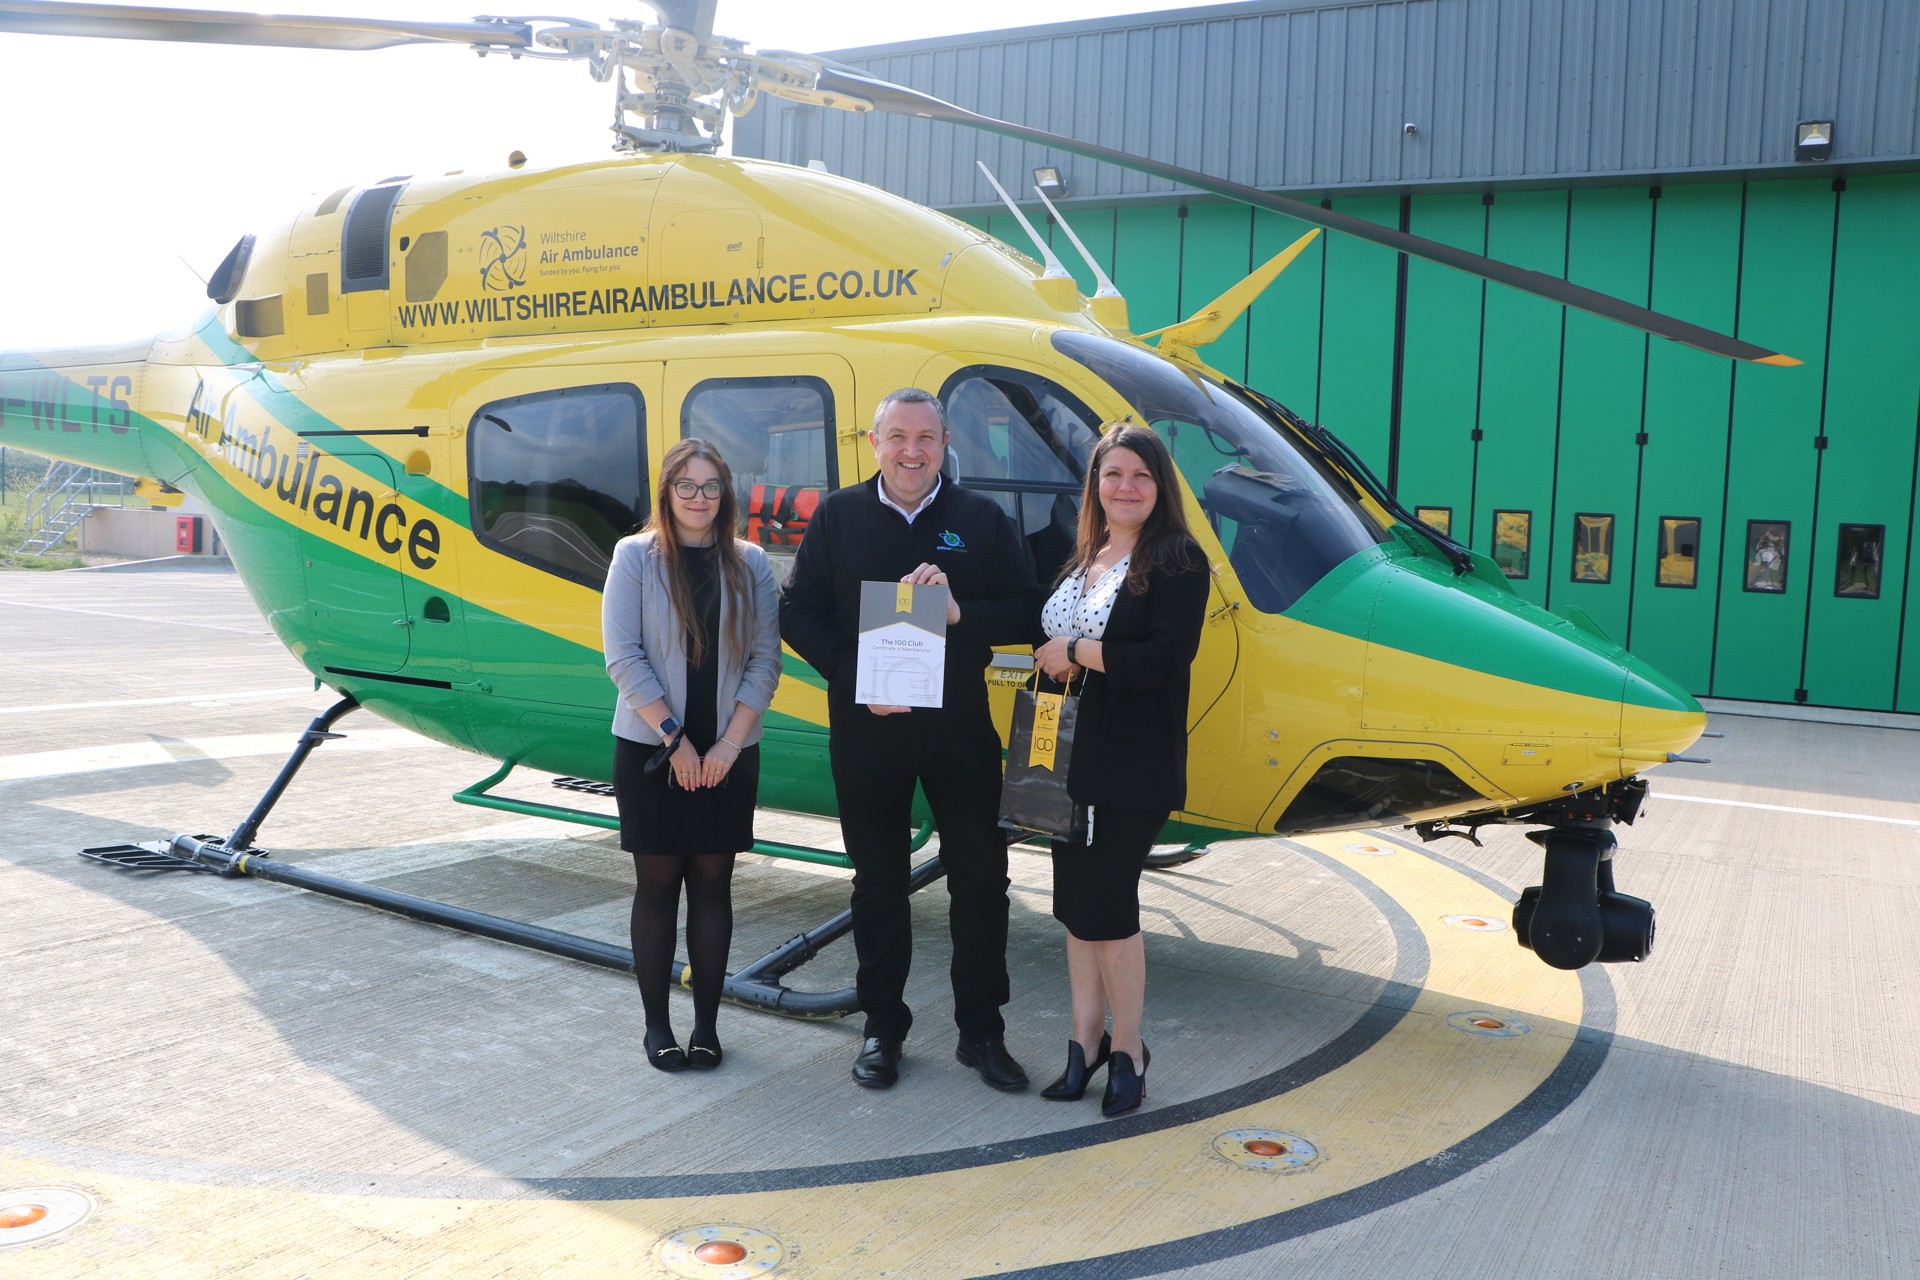 Matt Goodall and Office Evolution colleagues holding 100 club branded certificate and gift bag, standing in front of the helicopter